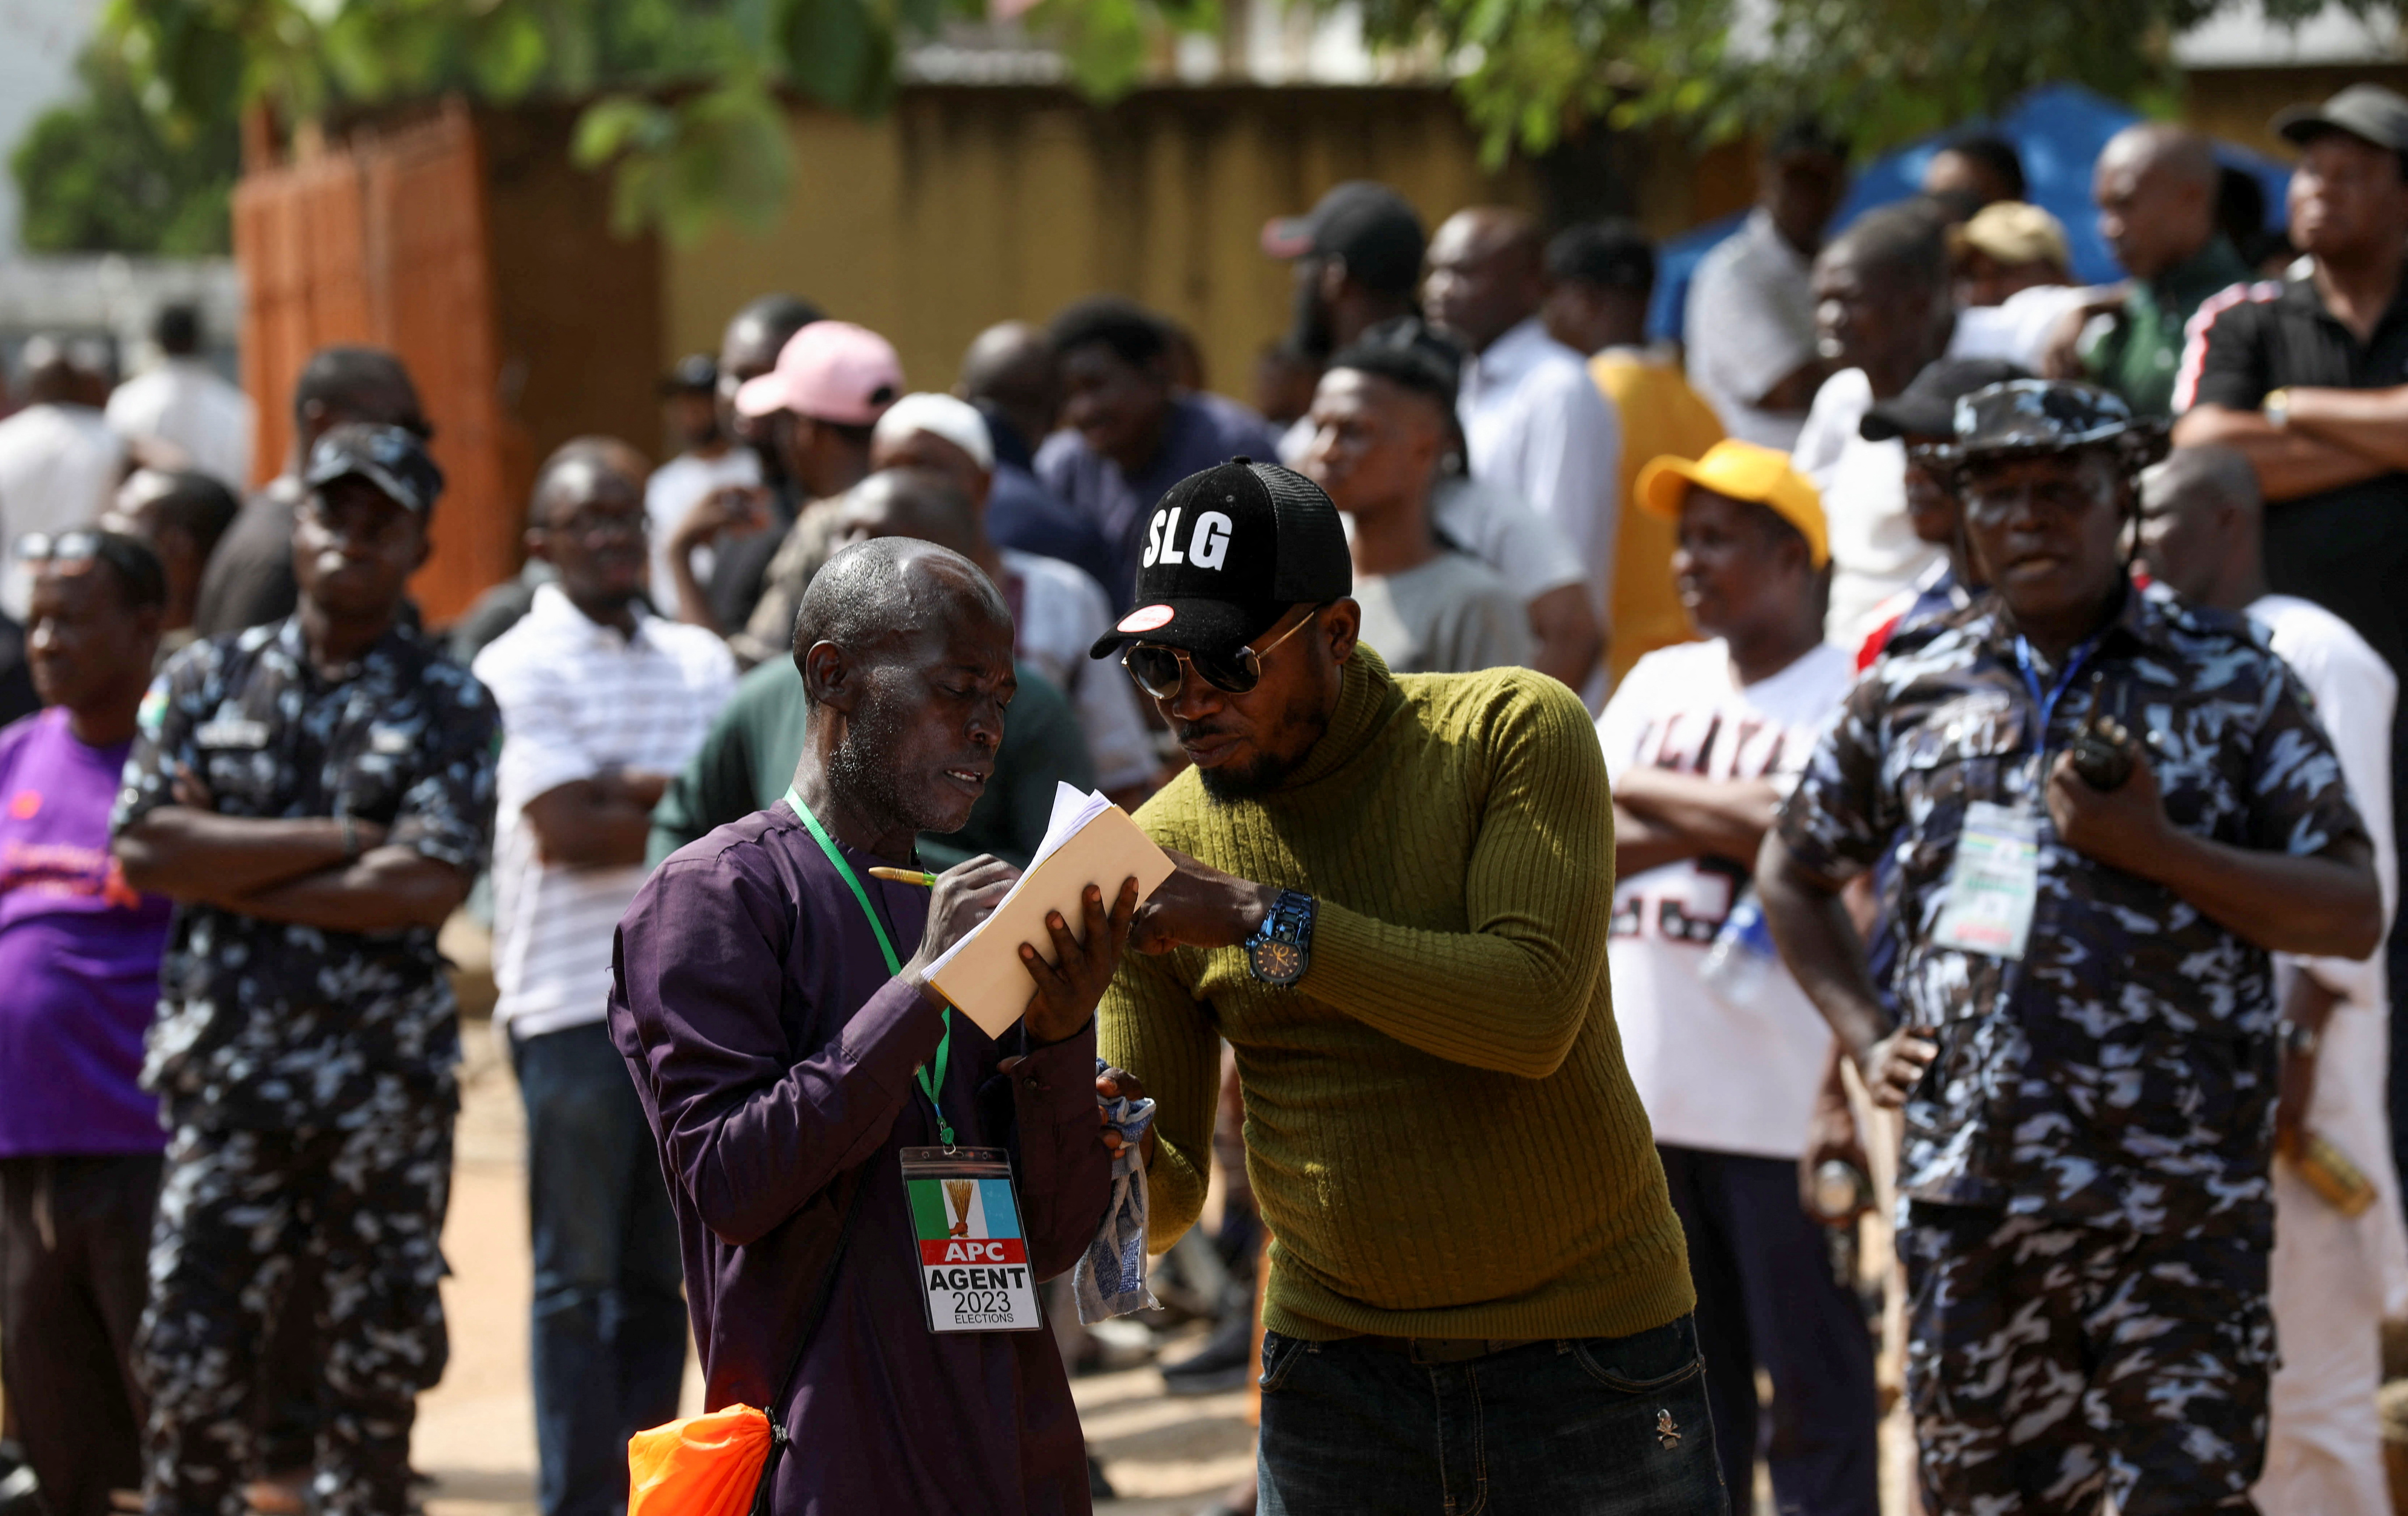 Political party agents discuss results after the vote-counting process at a polling unit, in Lagos